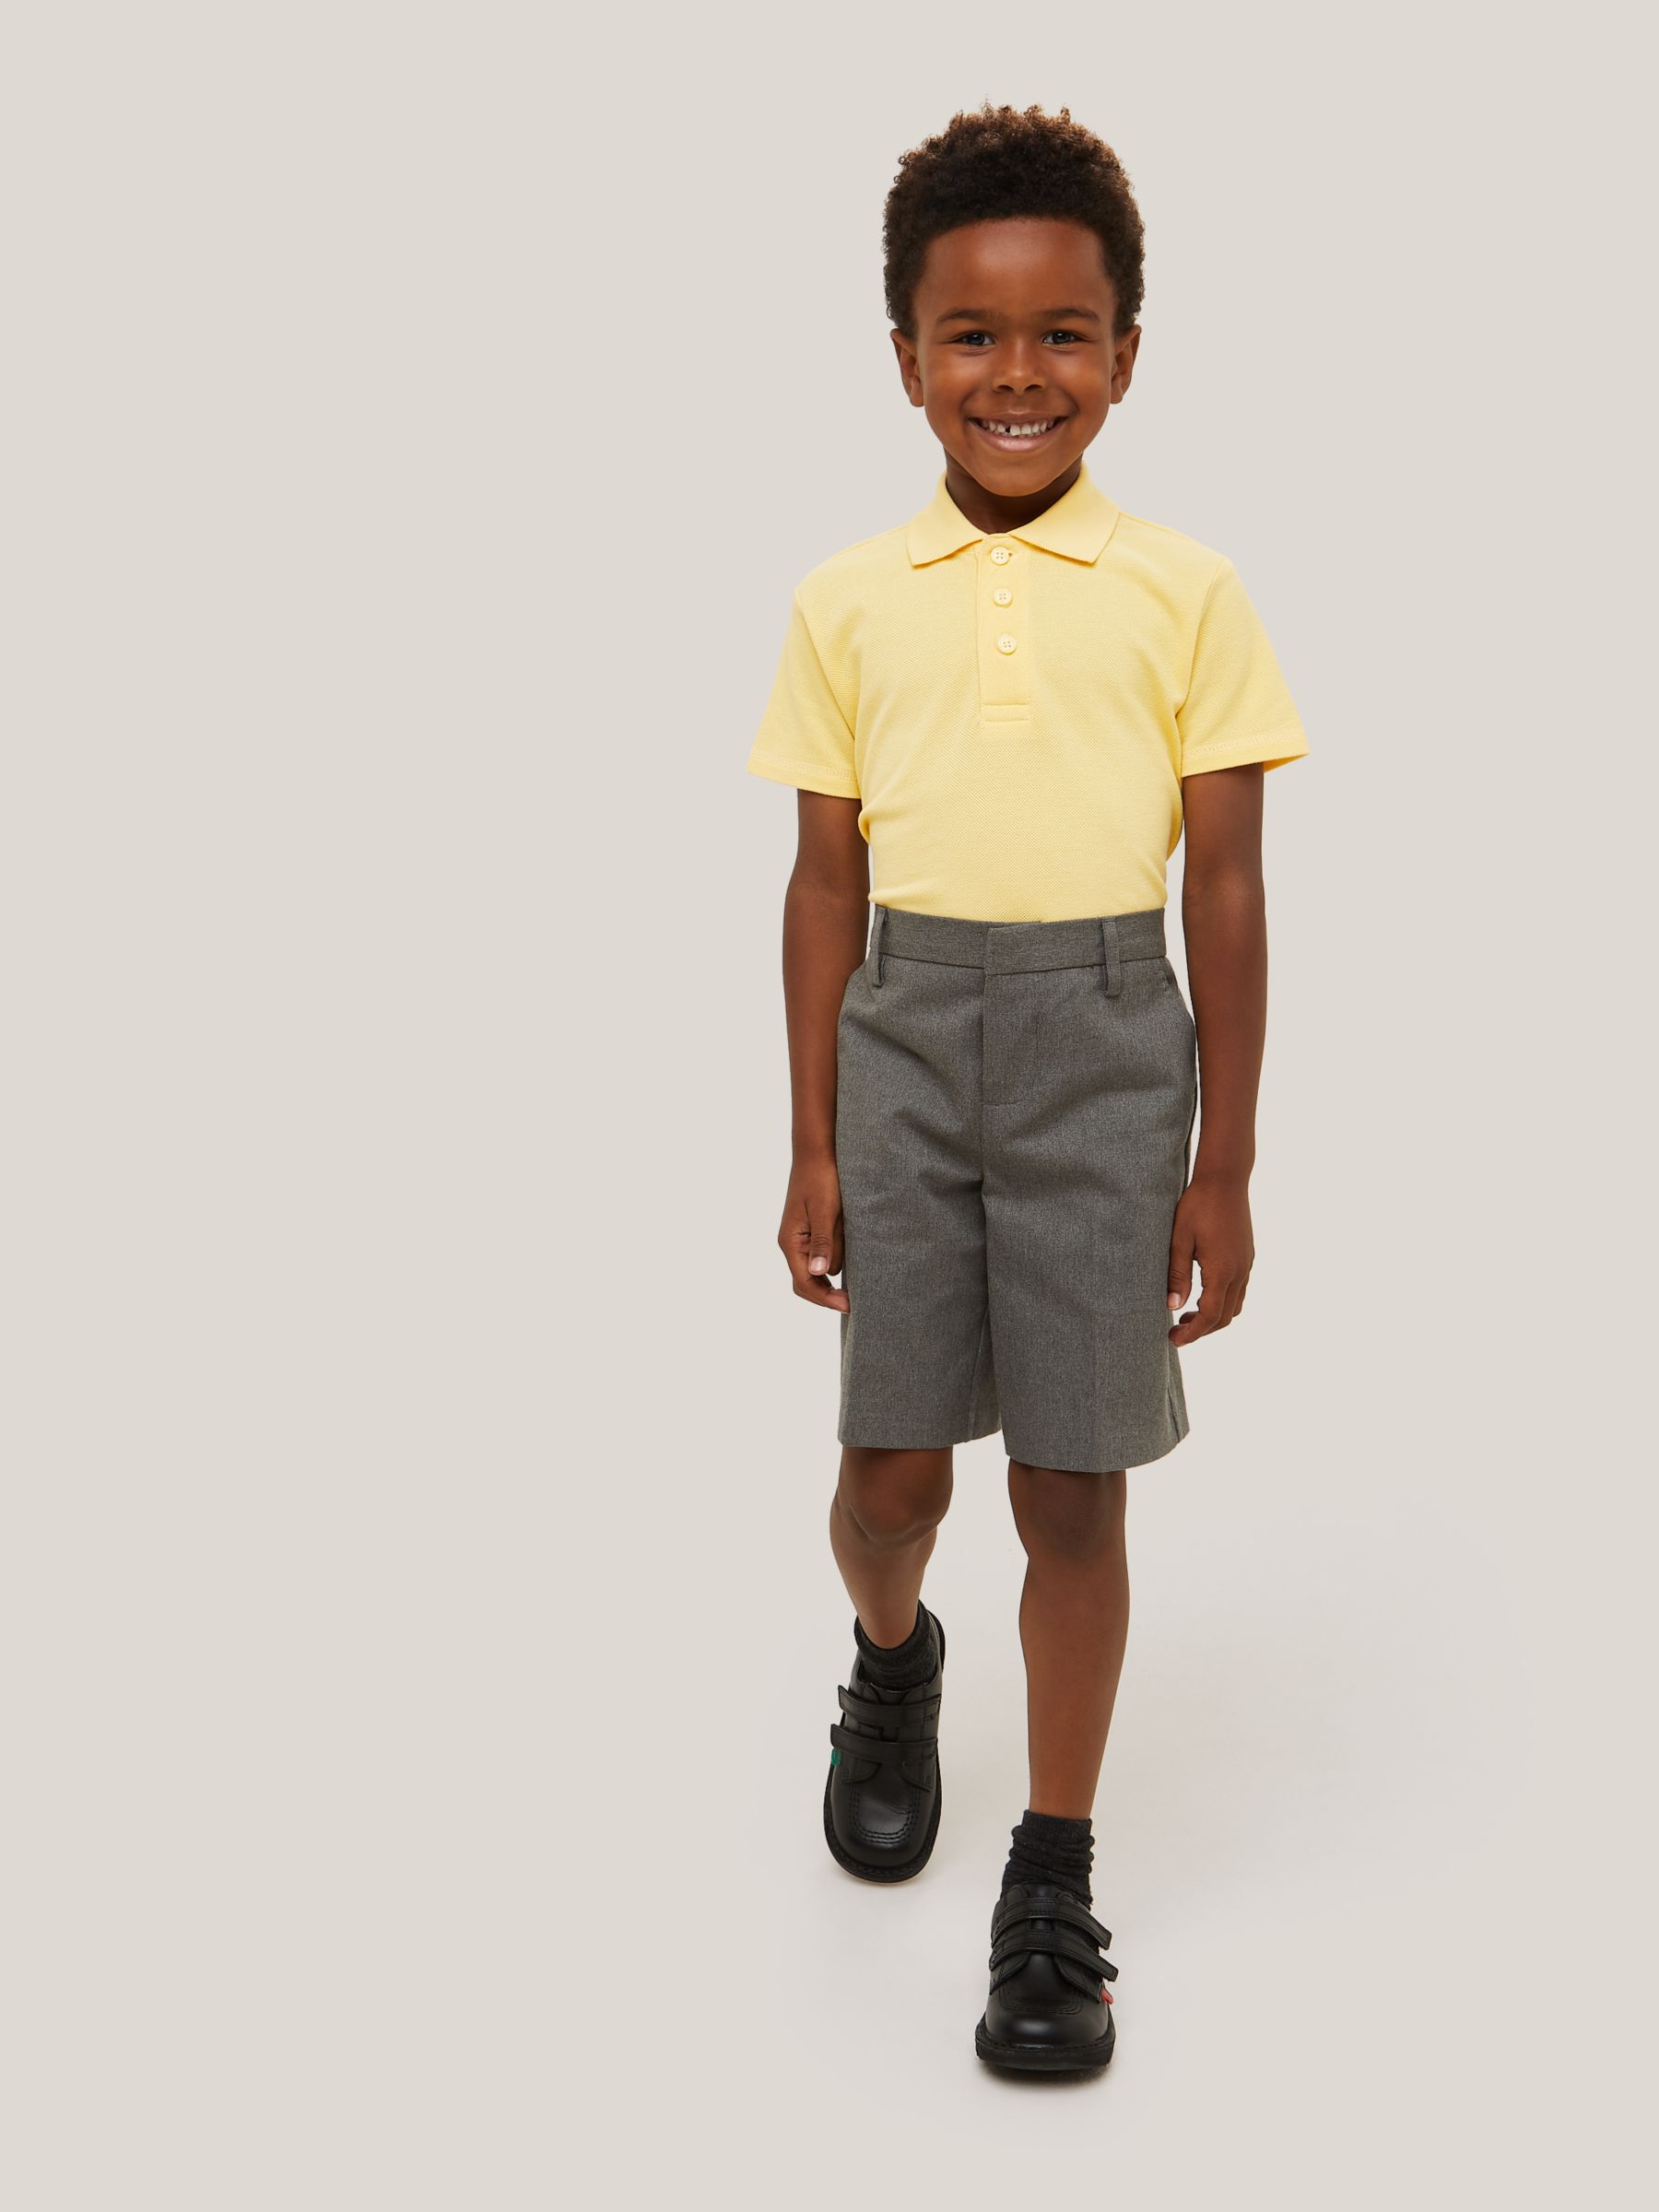 Buy John Lewis Unisex Pure Cotton School Polo Shirt, Pack of 2 Online at johnlewis.com